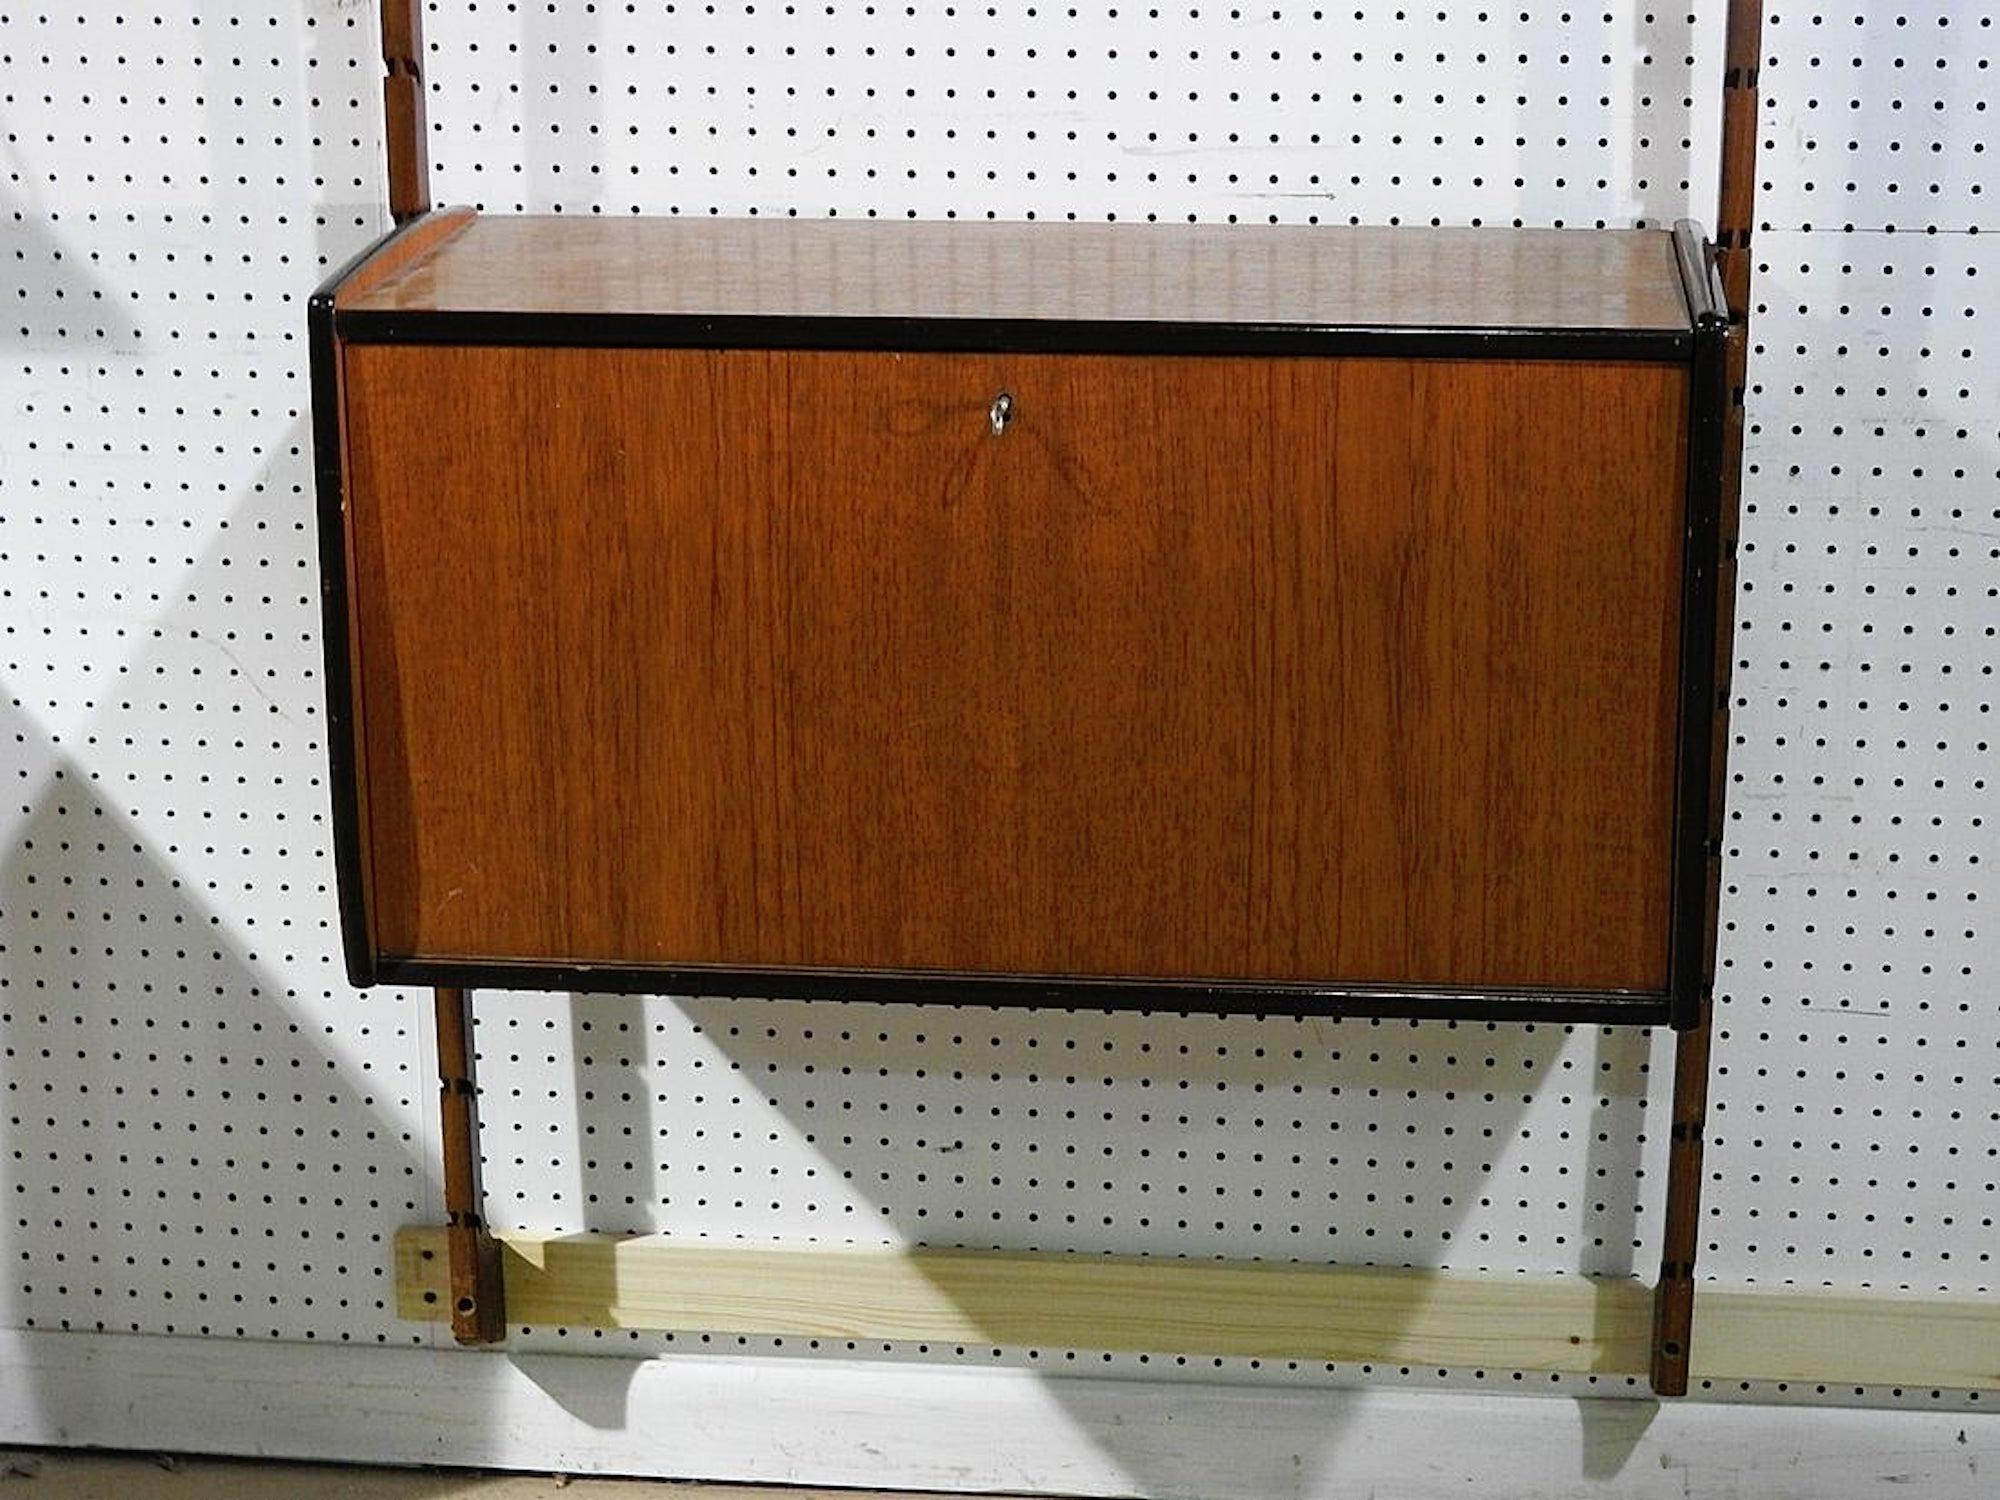 Wall hanging bar and cabinet. Mid-Century Modern in teak wood.
(Please confirm item location - NY or NJ - with dealer).
  